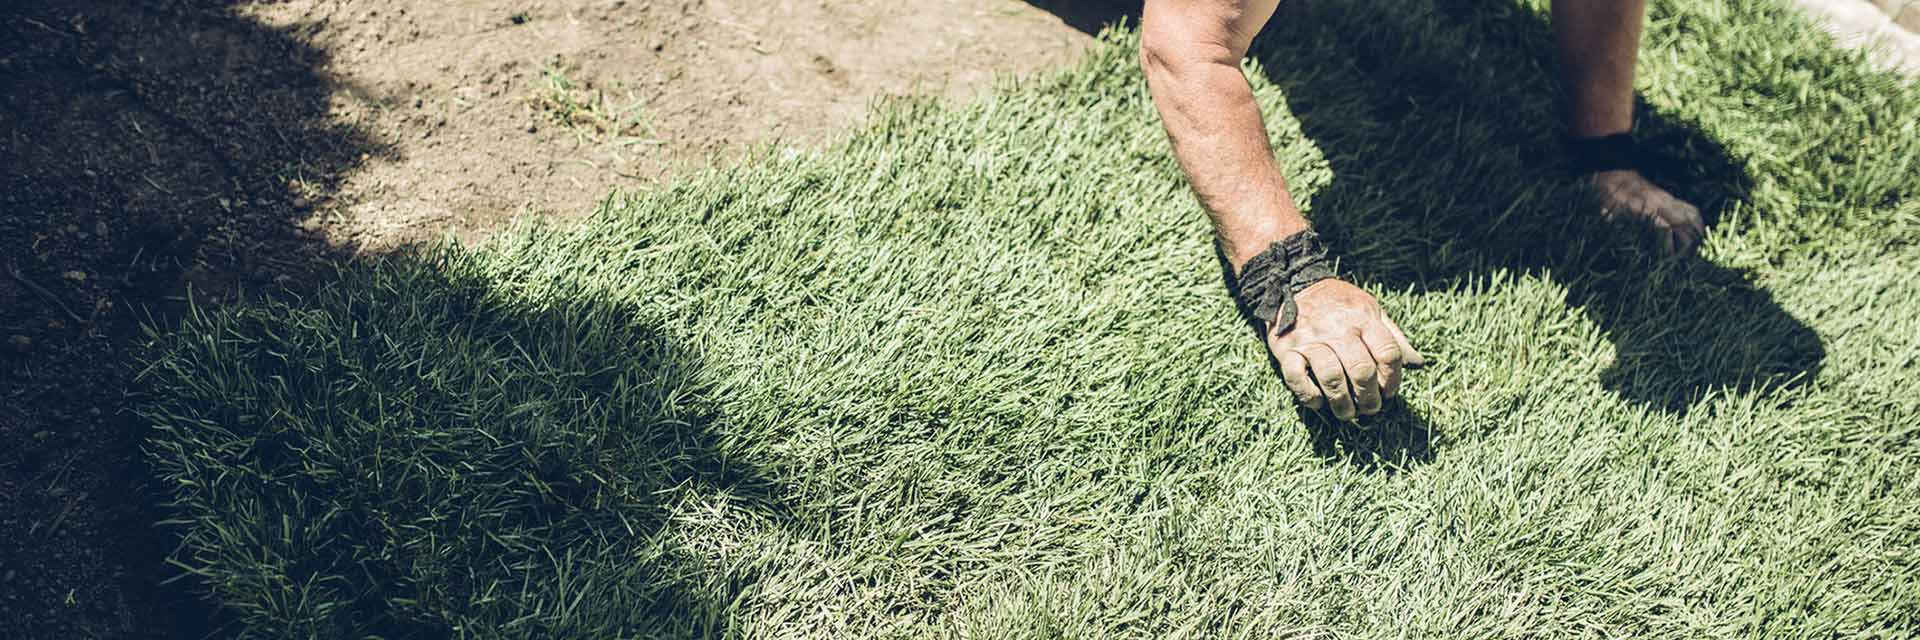 Man standing on Australian grass supplied by one of myhomeTURF's local growers.